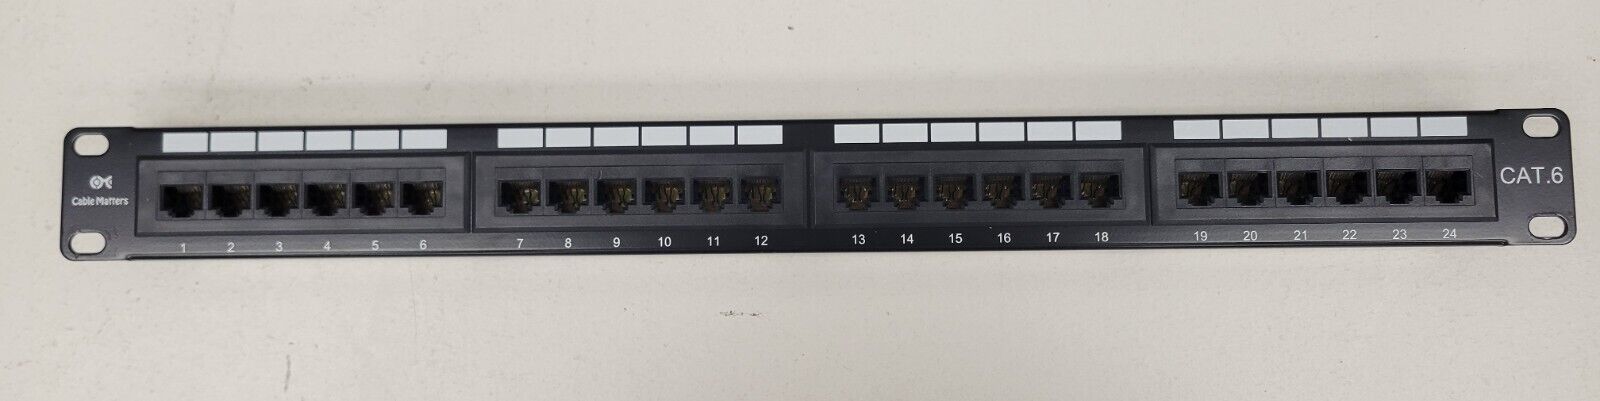 Cable Matters 24-port Cat6 Patch Panel, 110 Type (568A/B Compatible) (UL)